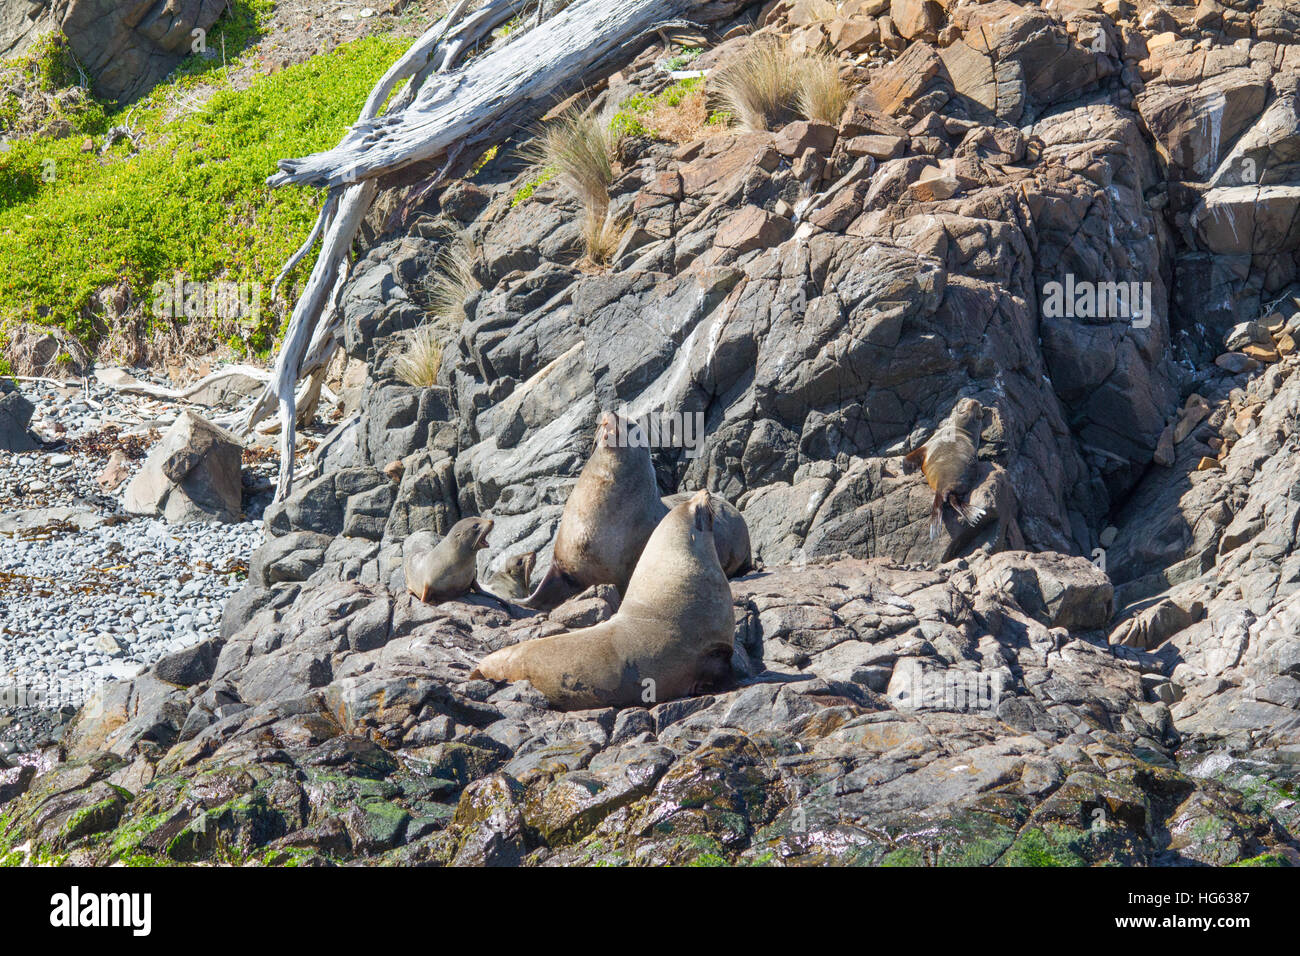 Brown Fur Seal (Arctocephalus pusillus), also known as the Cape Fur Seal, South African Fur Seal and the Australian Fur Seal resting on rocks Stock Photo